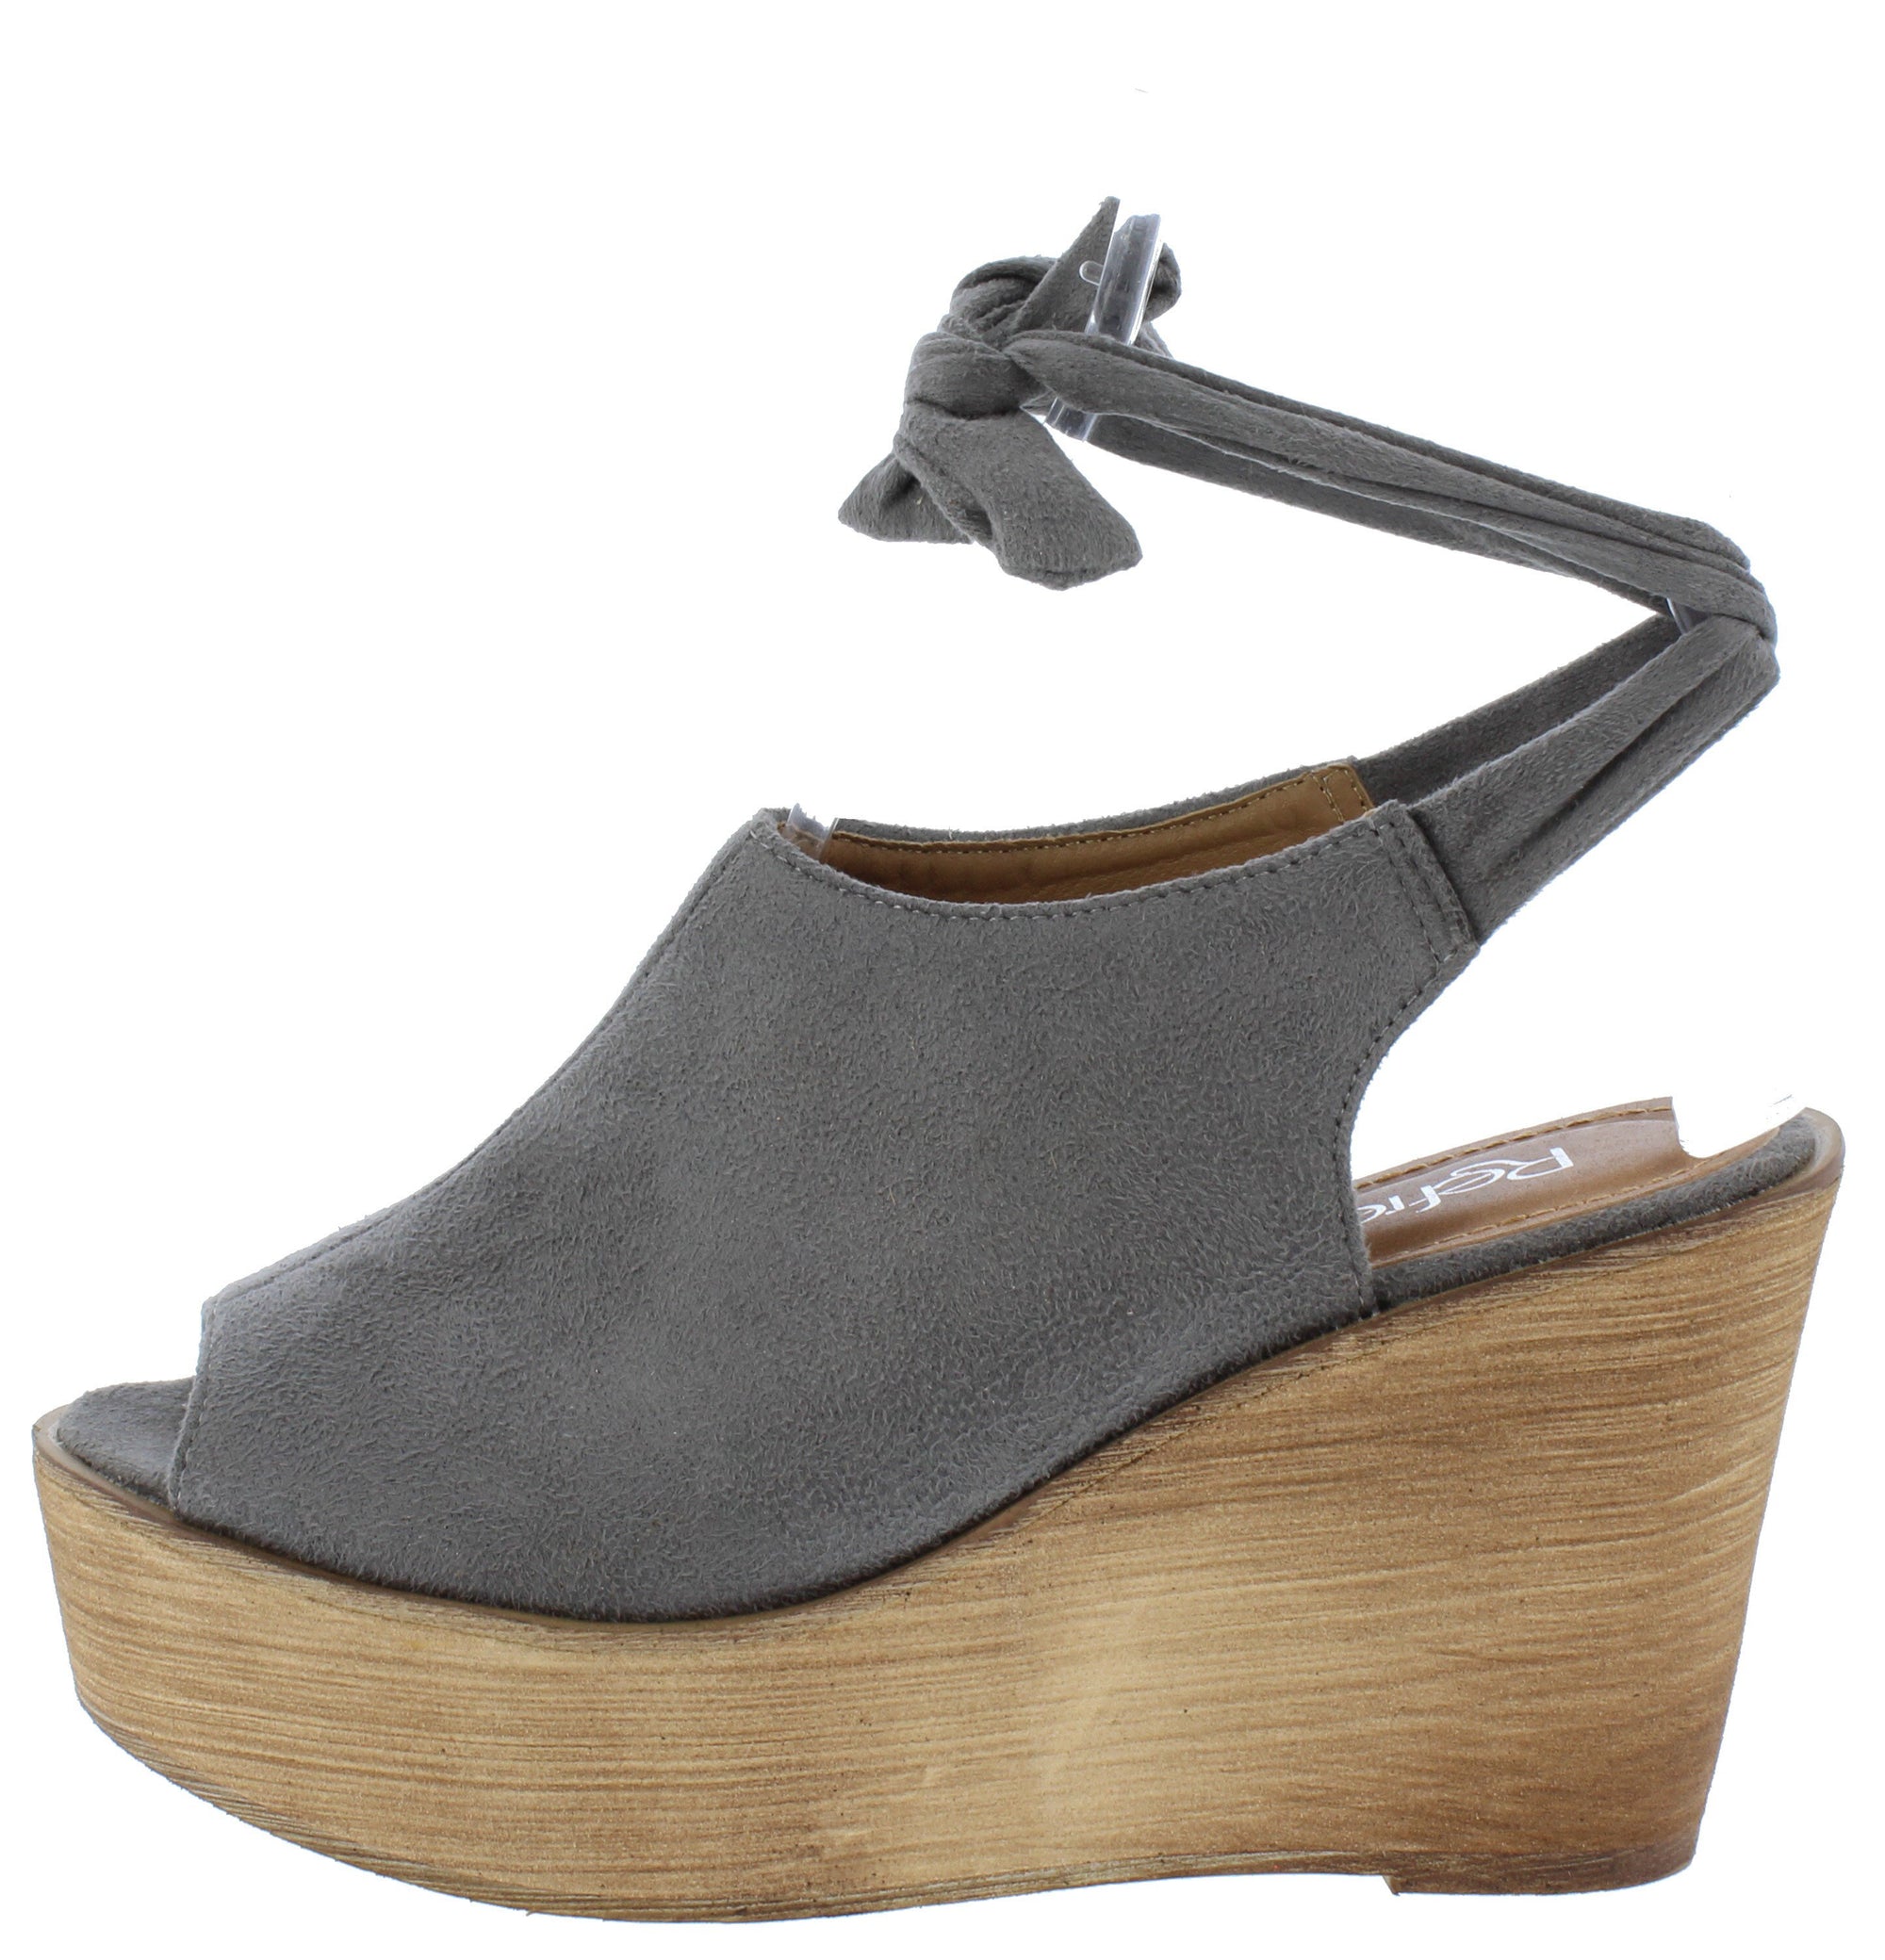 gray wedges women's shoes